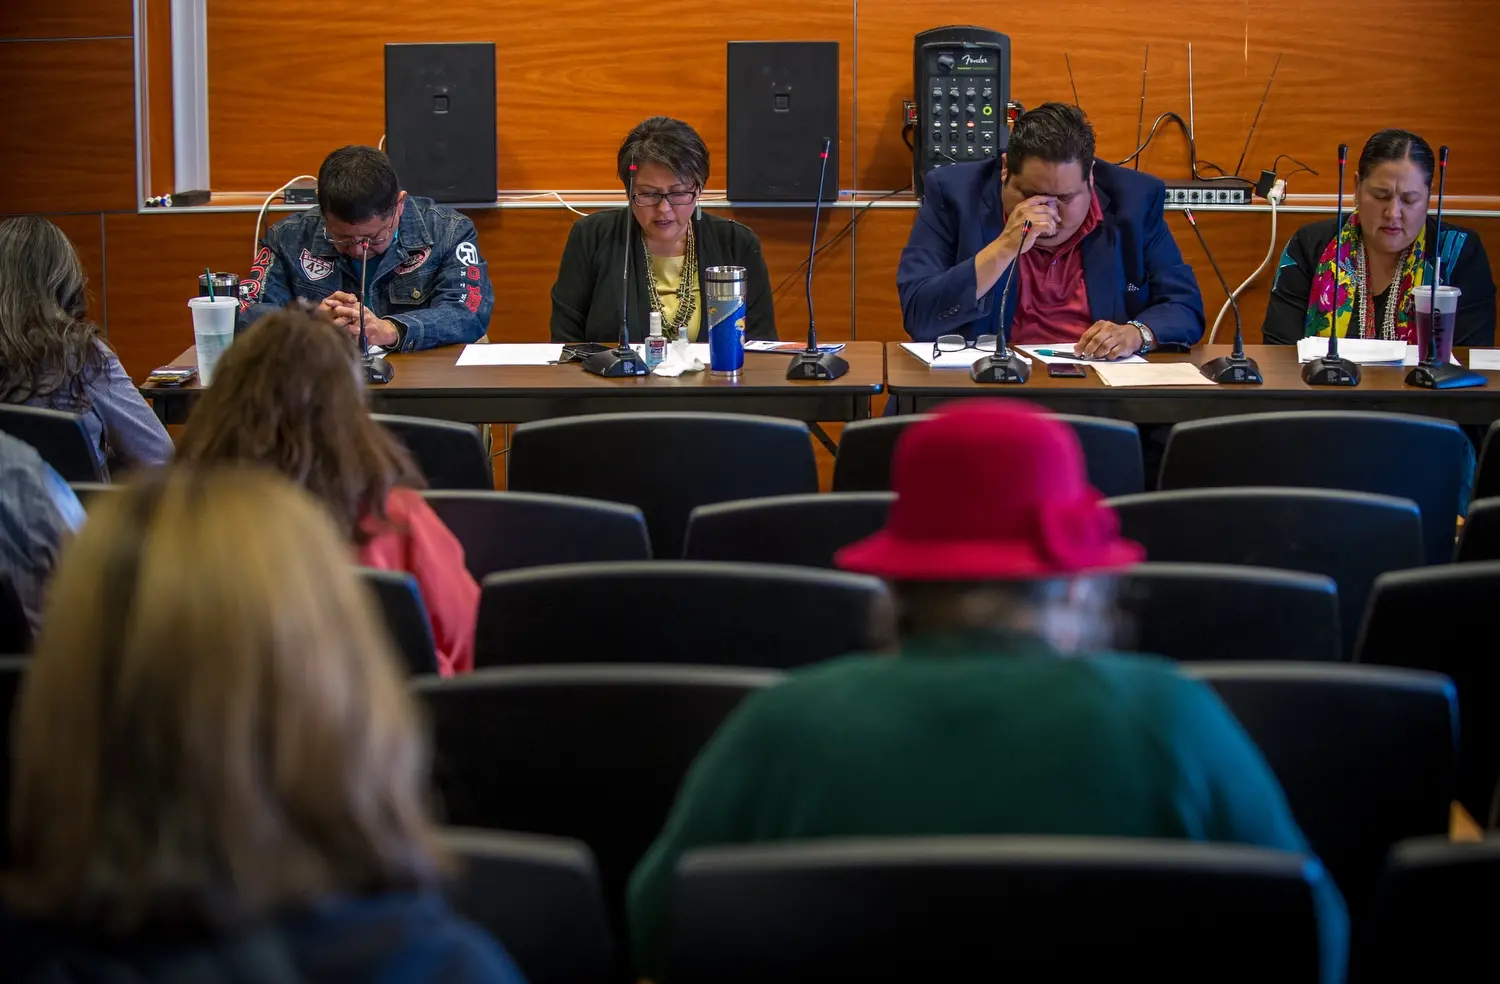 Navajo Nation council members pray at the beginning of a uranium public hearing sponsored by the Navajo Nation Council at Diné College in Shiprock, N.M. Image by Mary F. Calvert. United States, 2020.